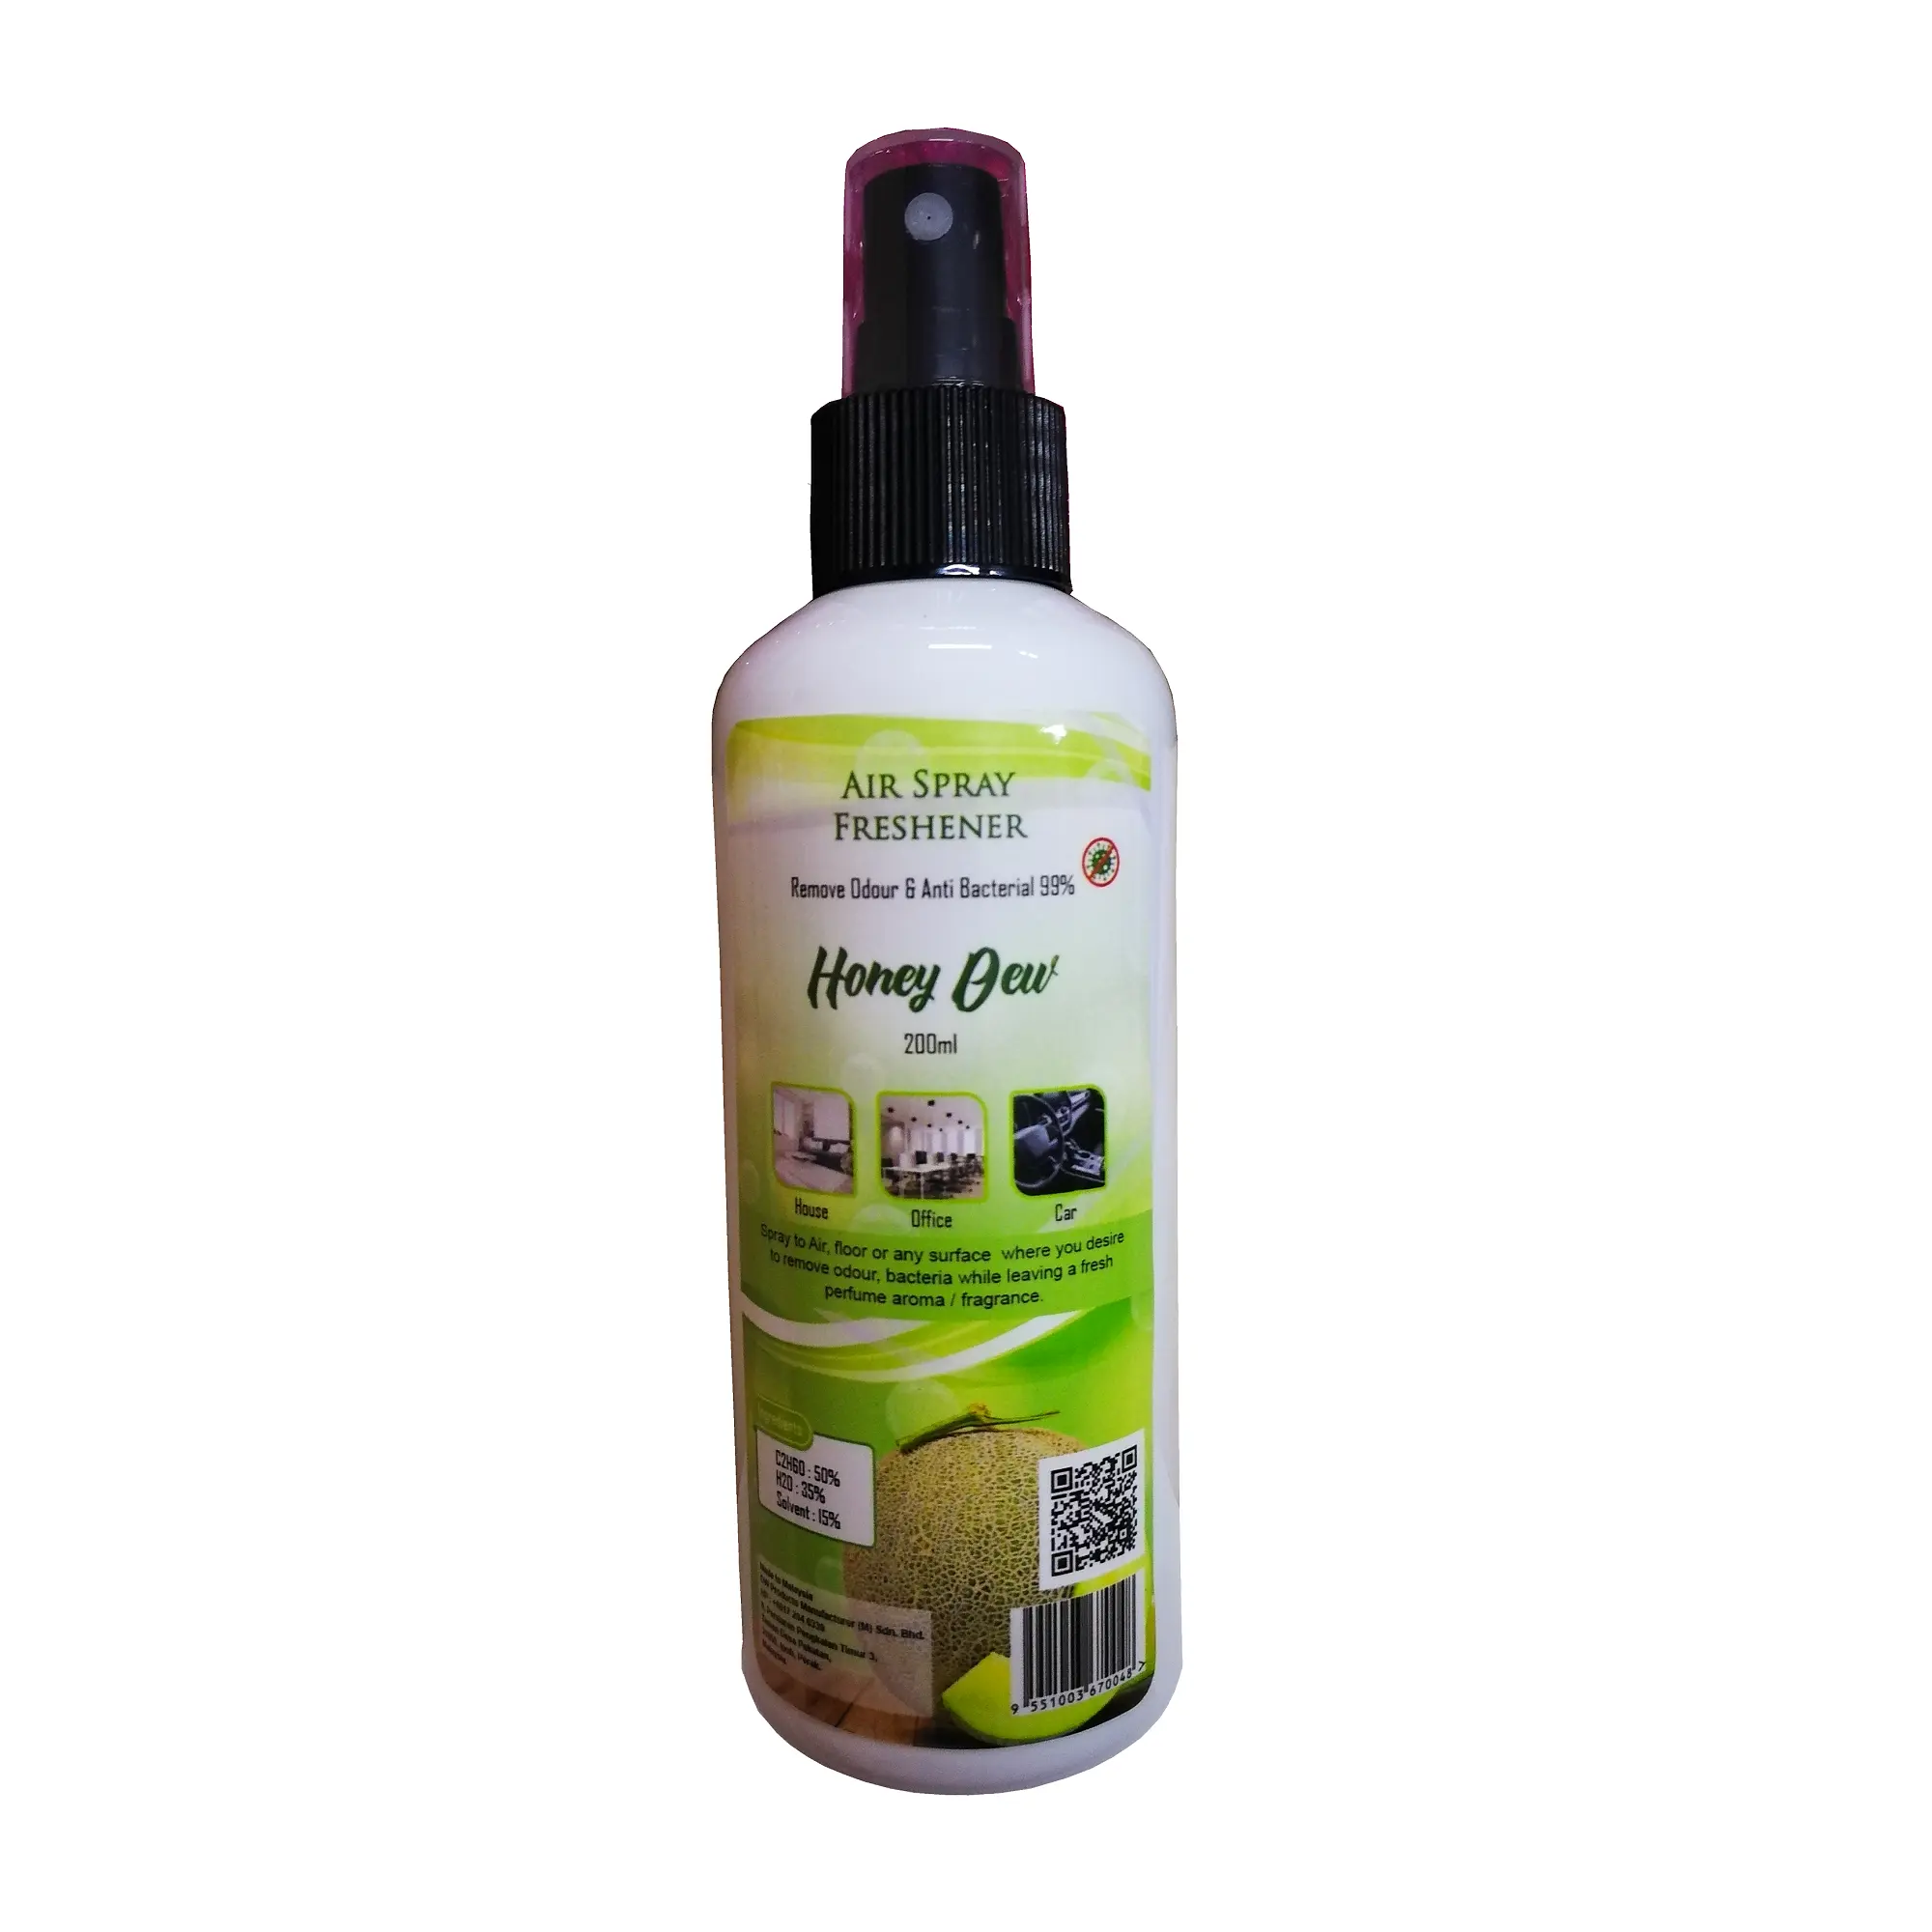 Car Air Refreshes Lowest Price Feature Quality Ingredient Bottle Package Long Last Scent Honey Dew Malaysia